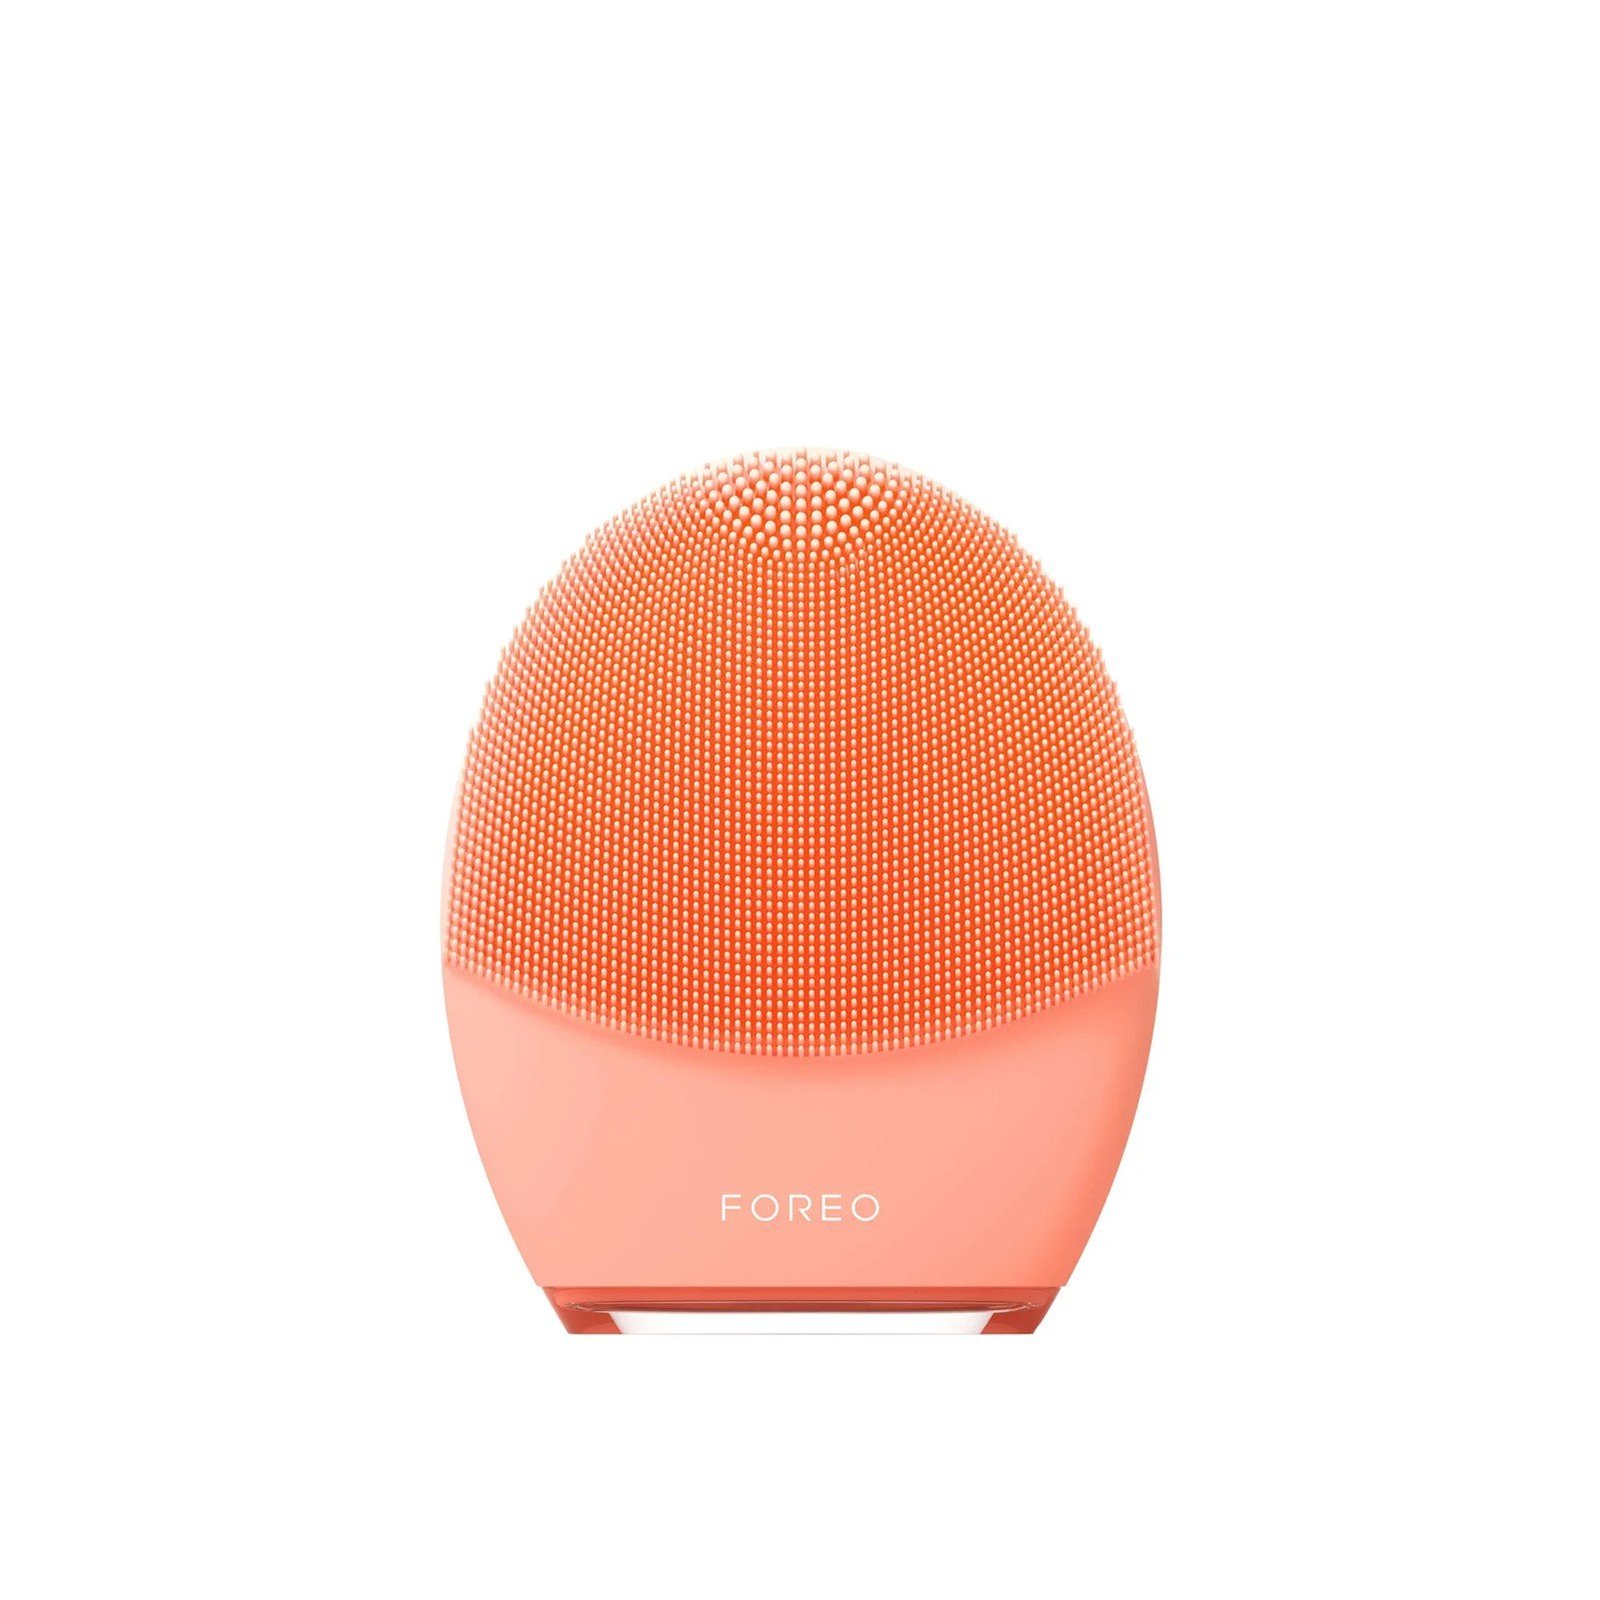 Foreo Luna 4 2-In-1 Smart Facial Cleansing & Firming Device Balanced Skin